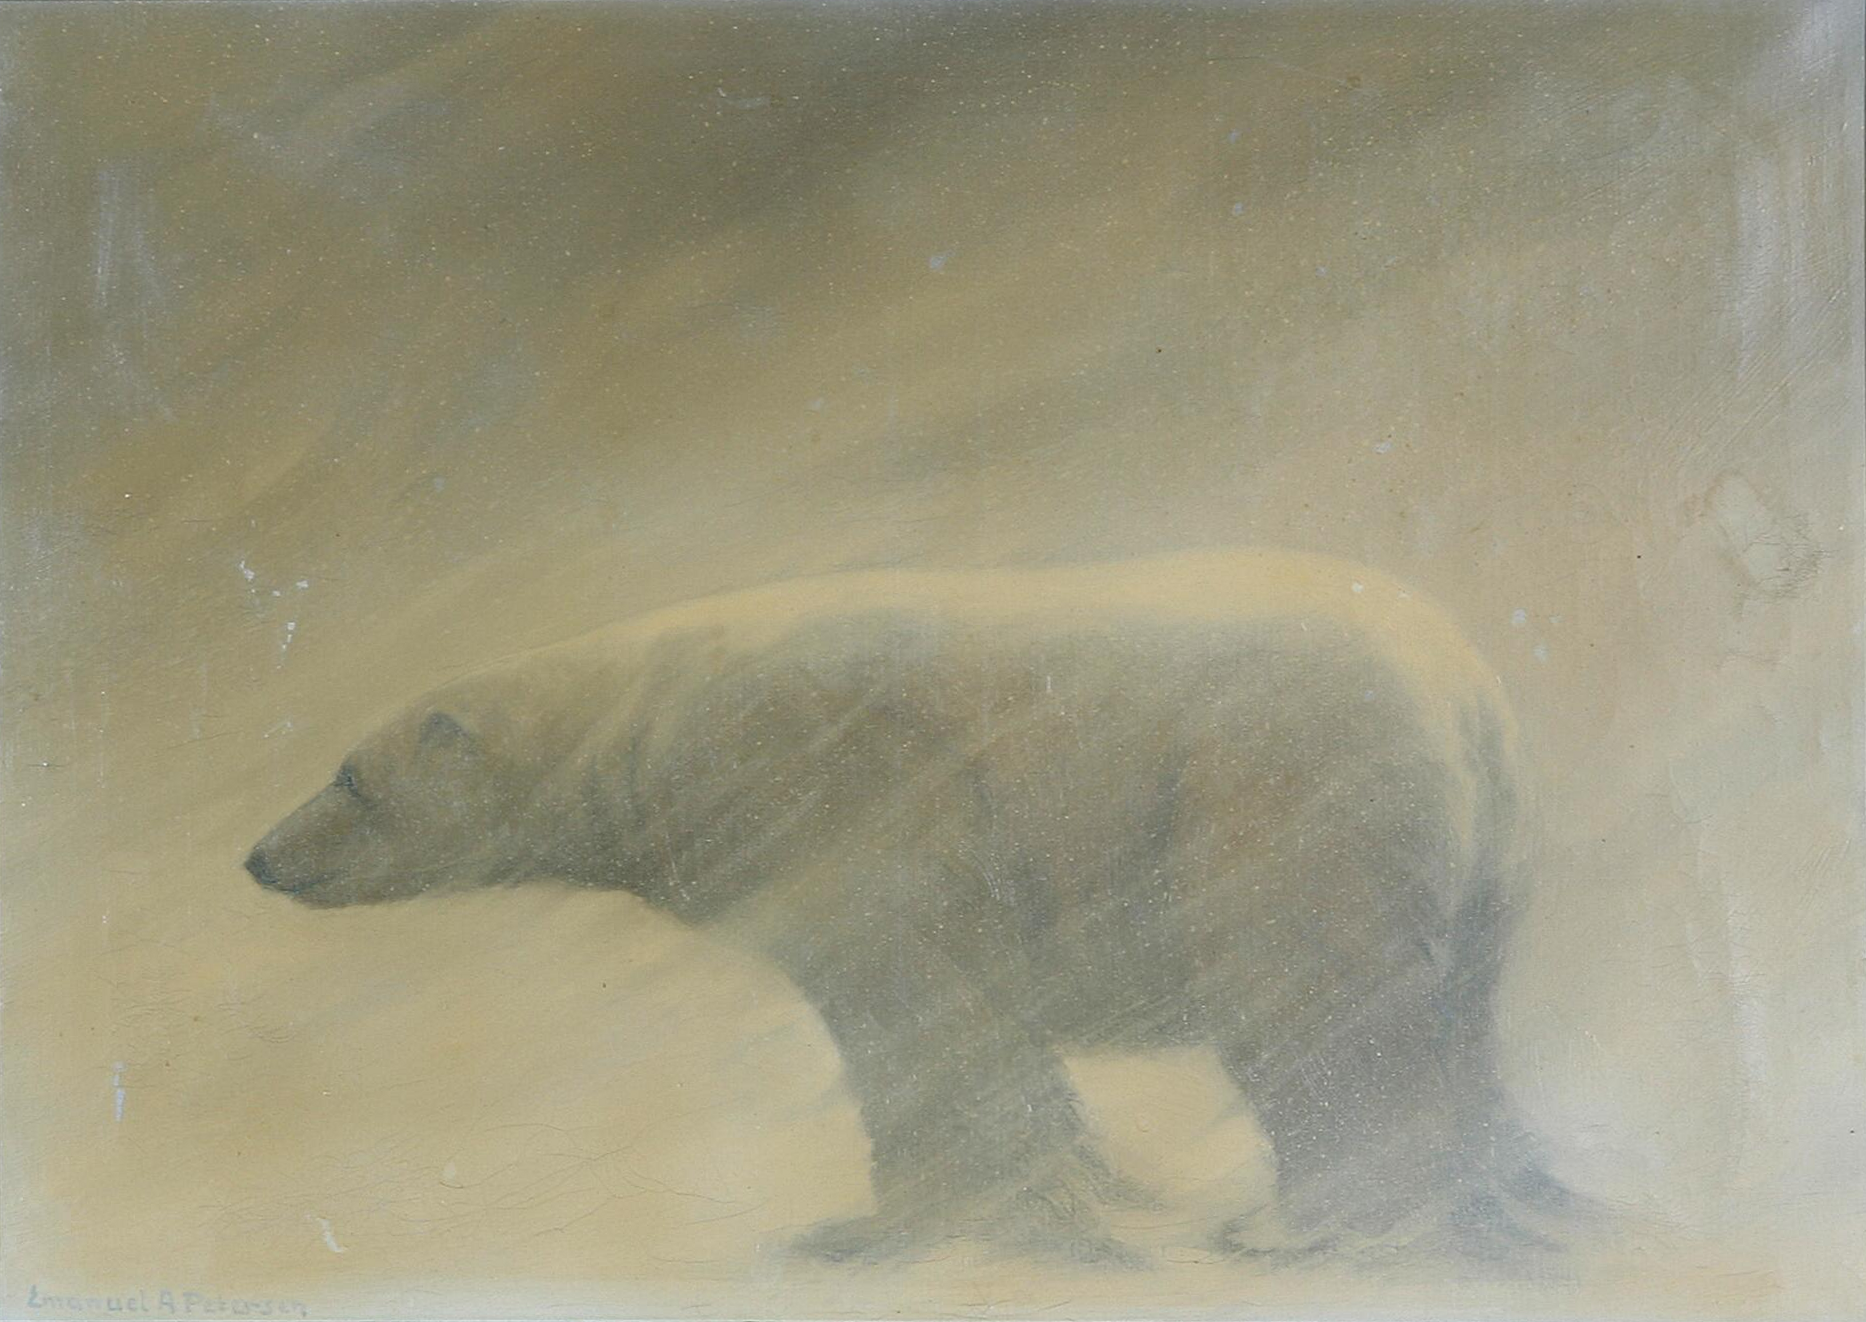 A sideview of a polar bear standing on all fours in a snowstorm